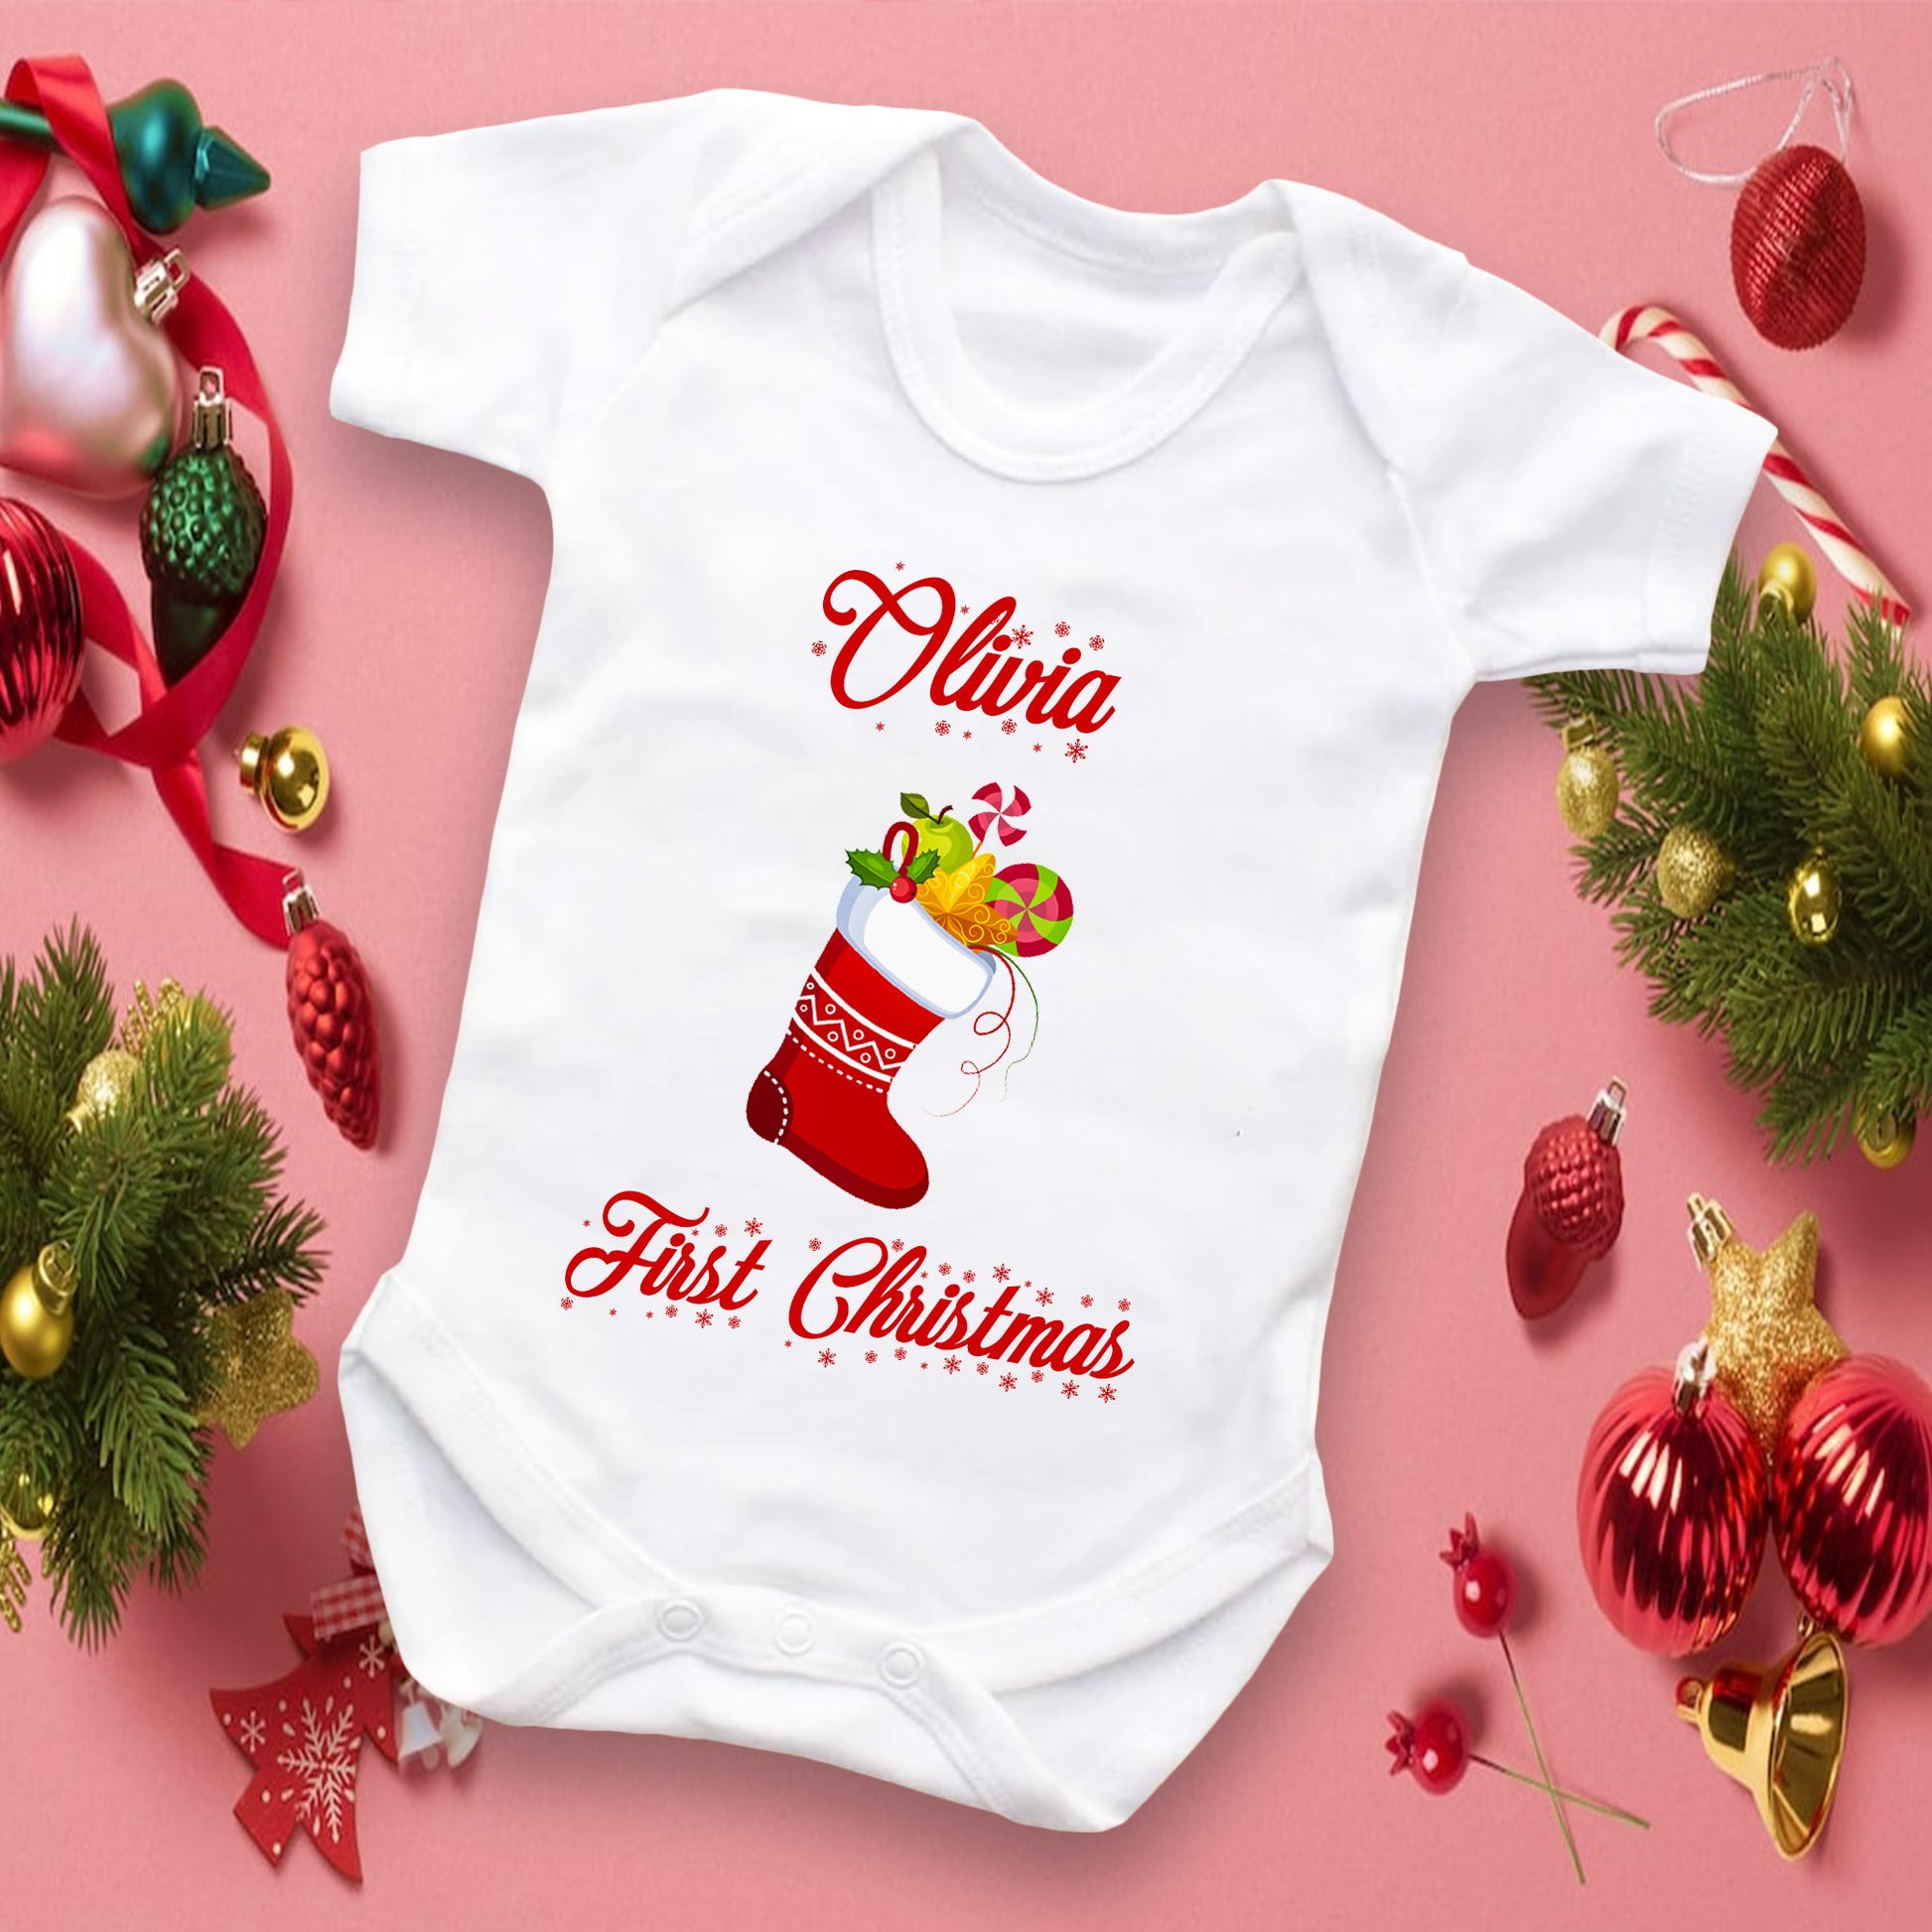 Personalized My 1st Christmas Baby Grow